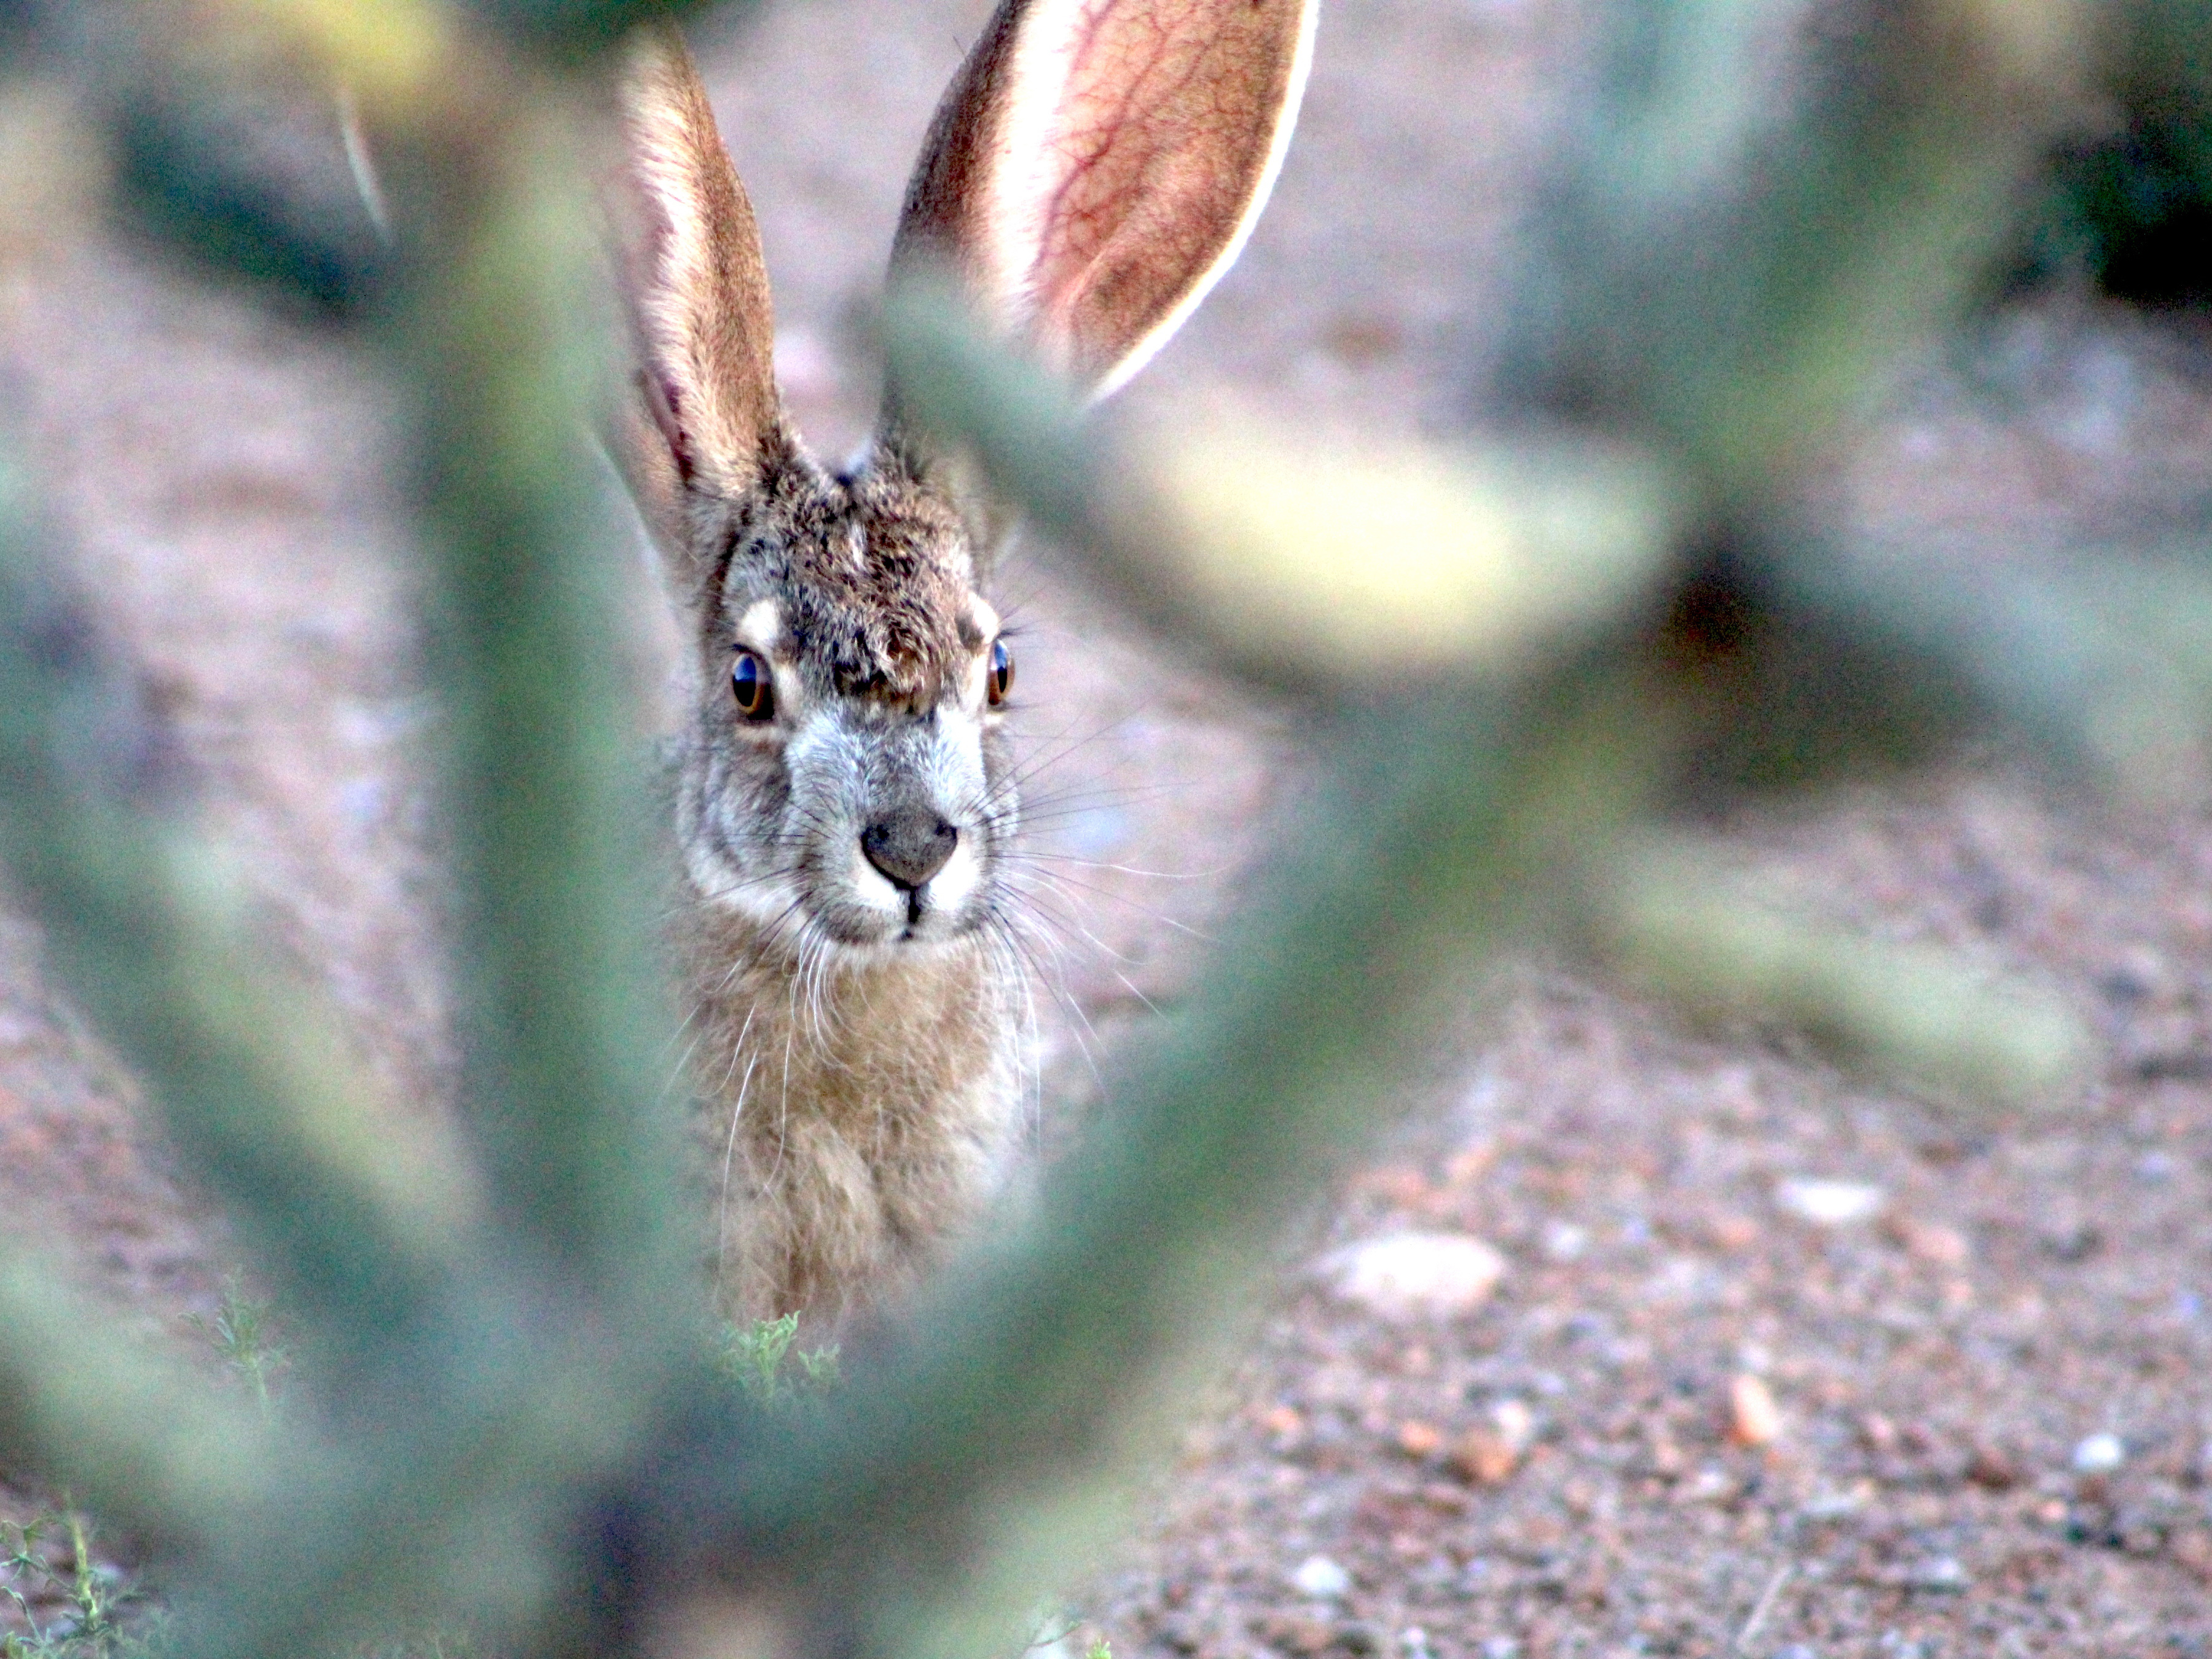 Photo by Matthew Turner  |  This jack rabbit thought he was totally hidden behind the cactus, but I caught him with my camera.